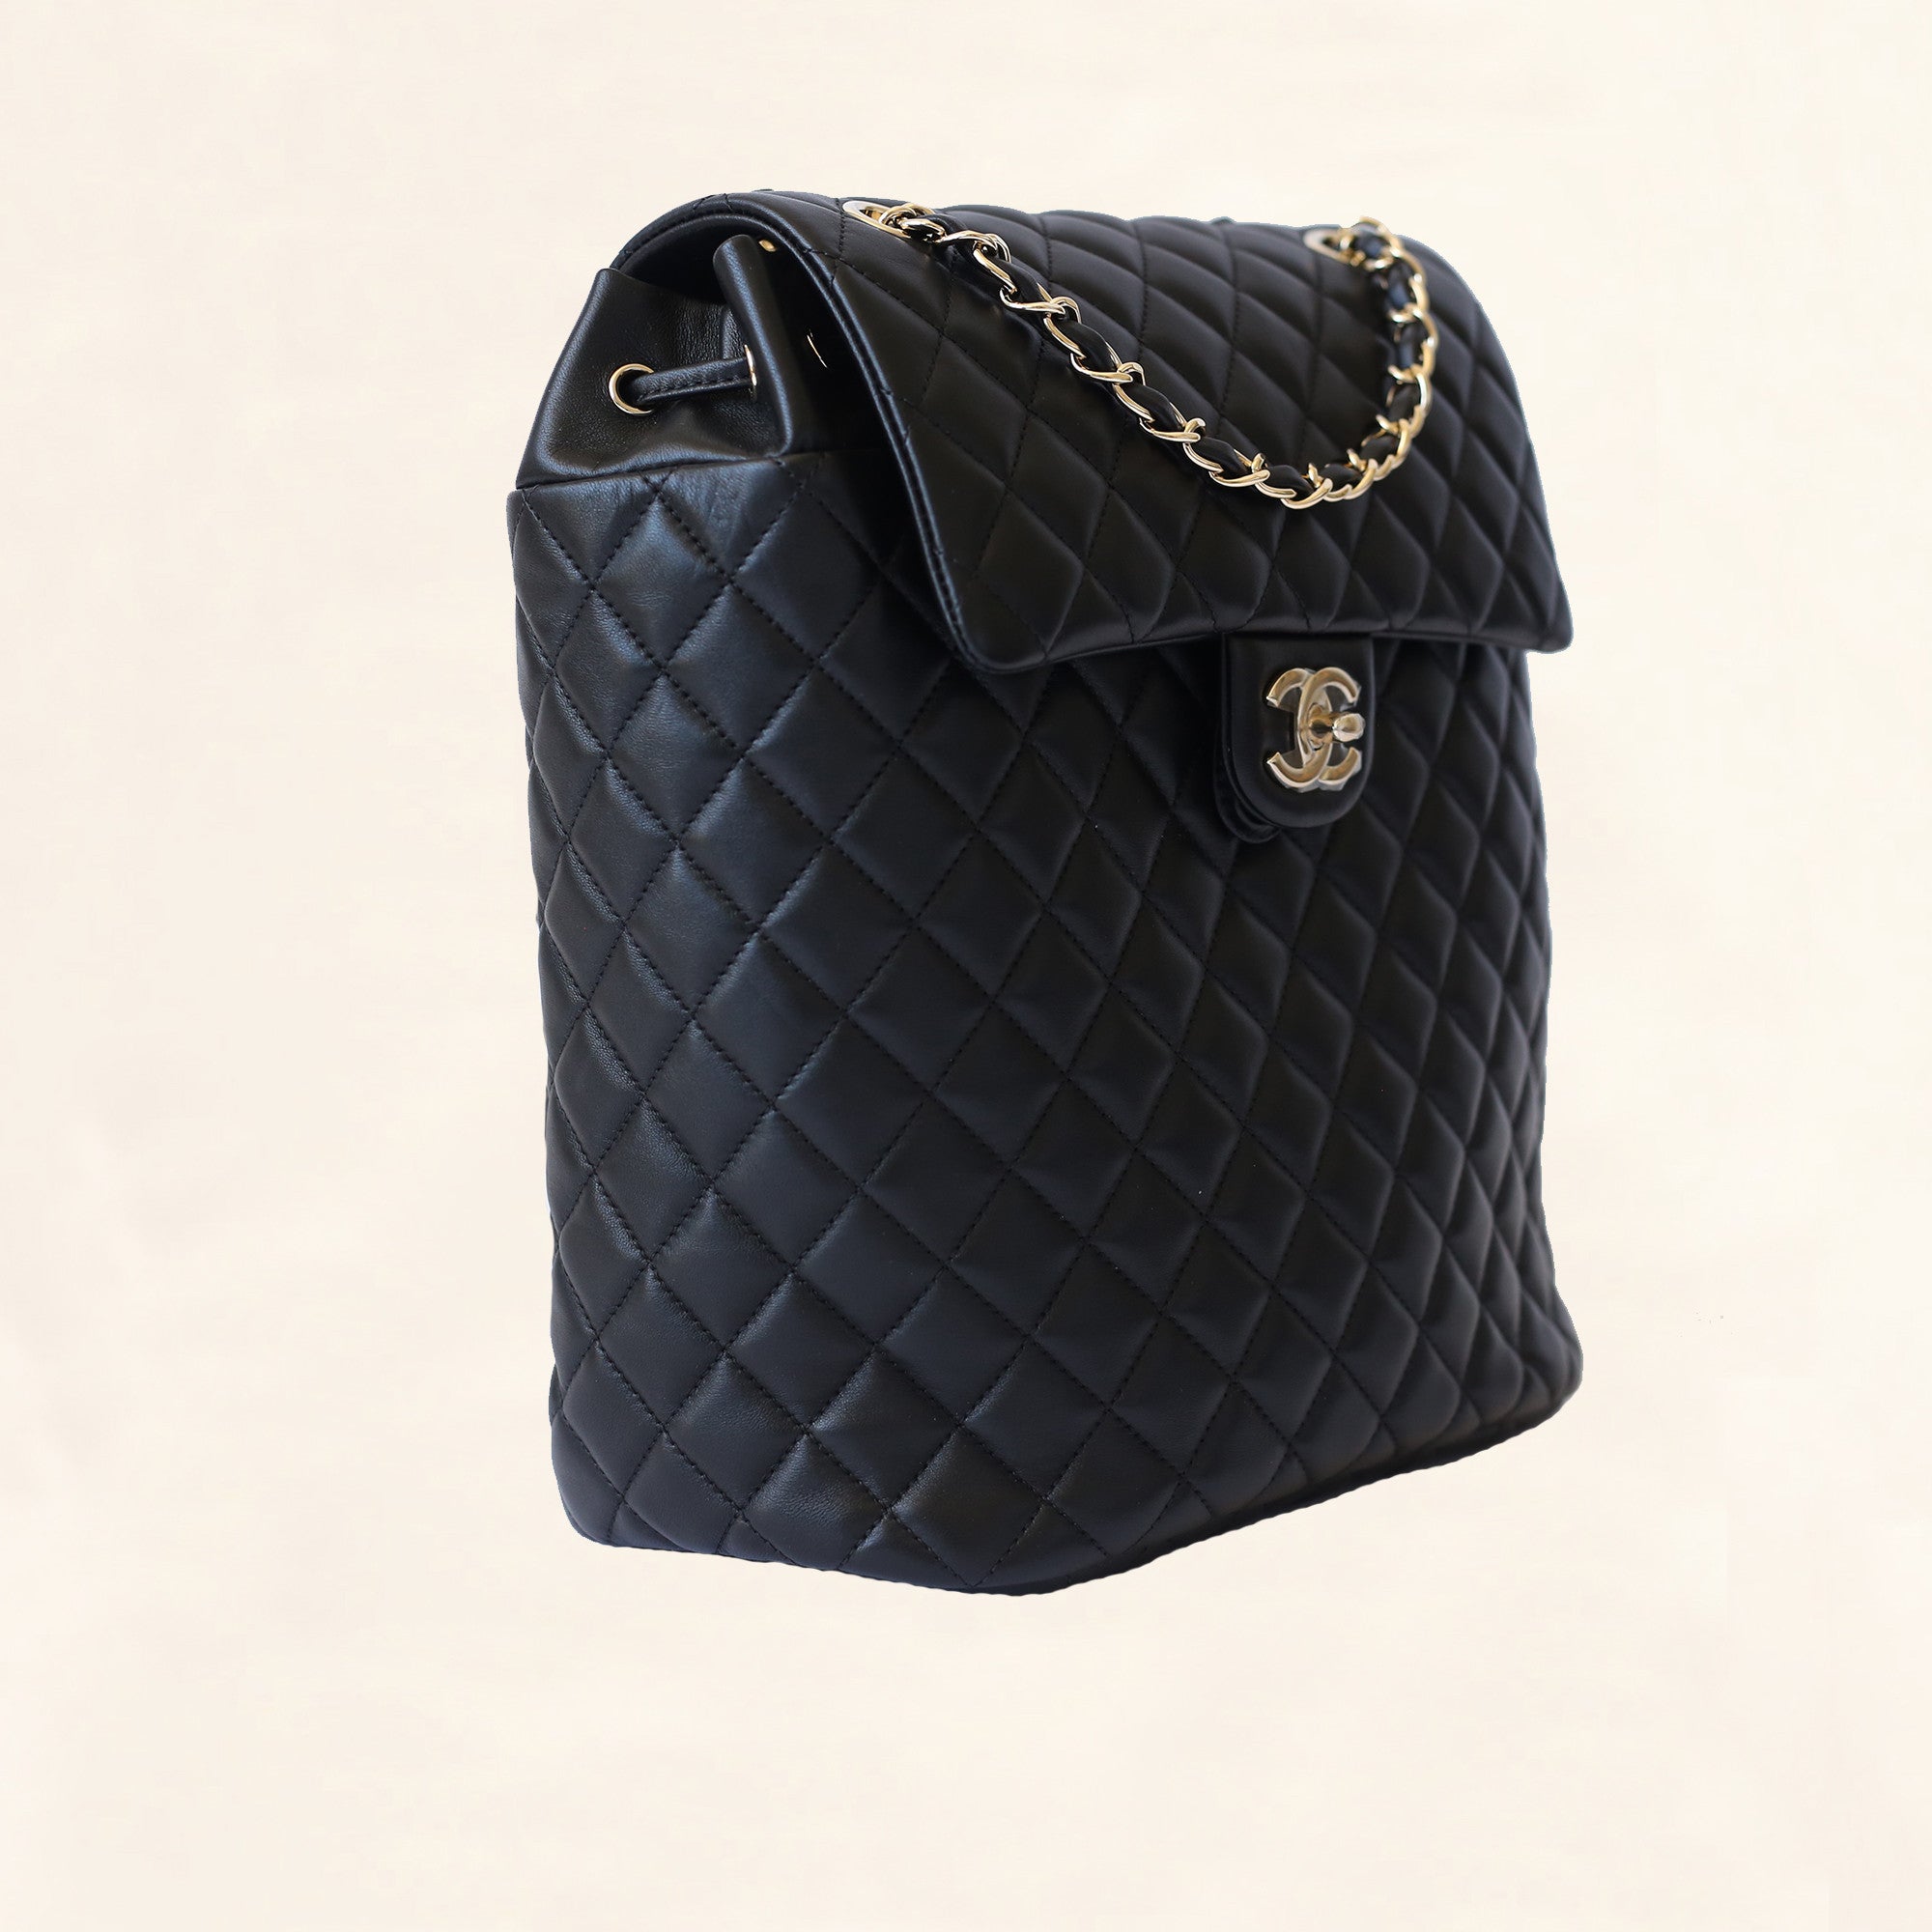 Chanel Small Urban Spirit Quilted Lambskin Backpack Bag Black